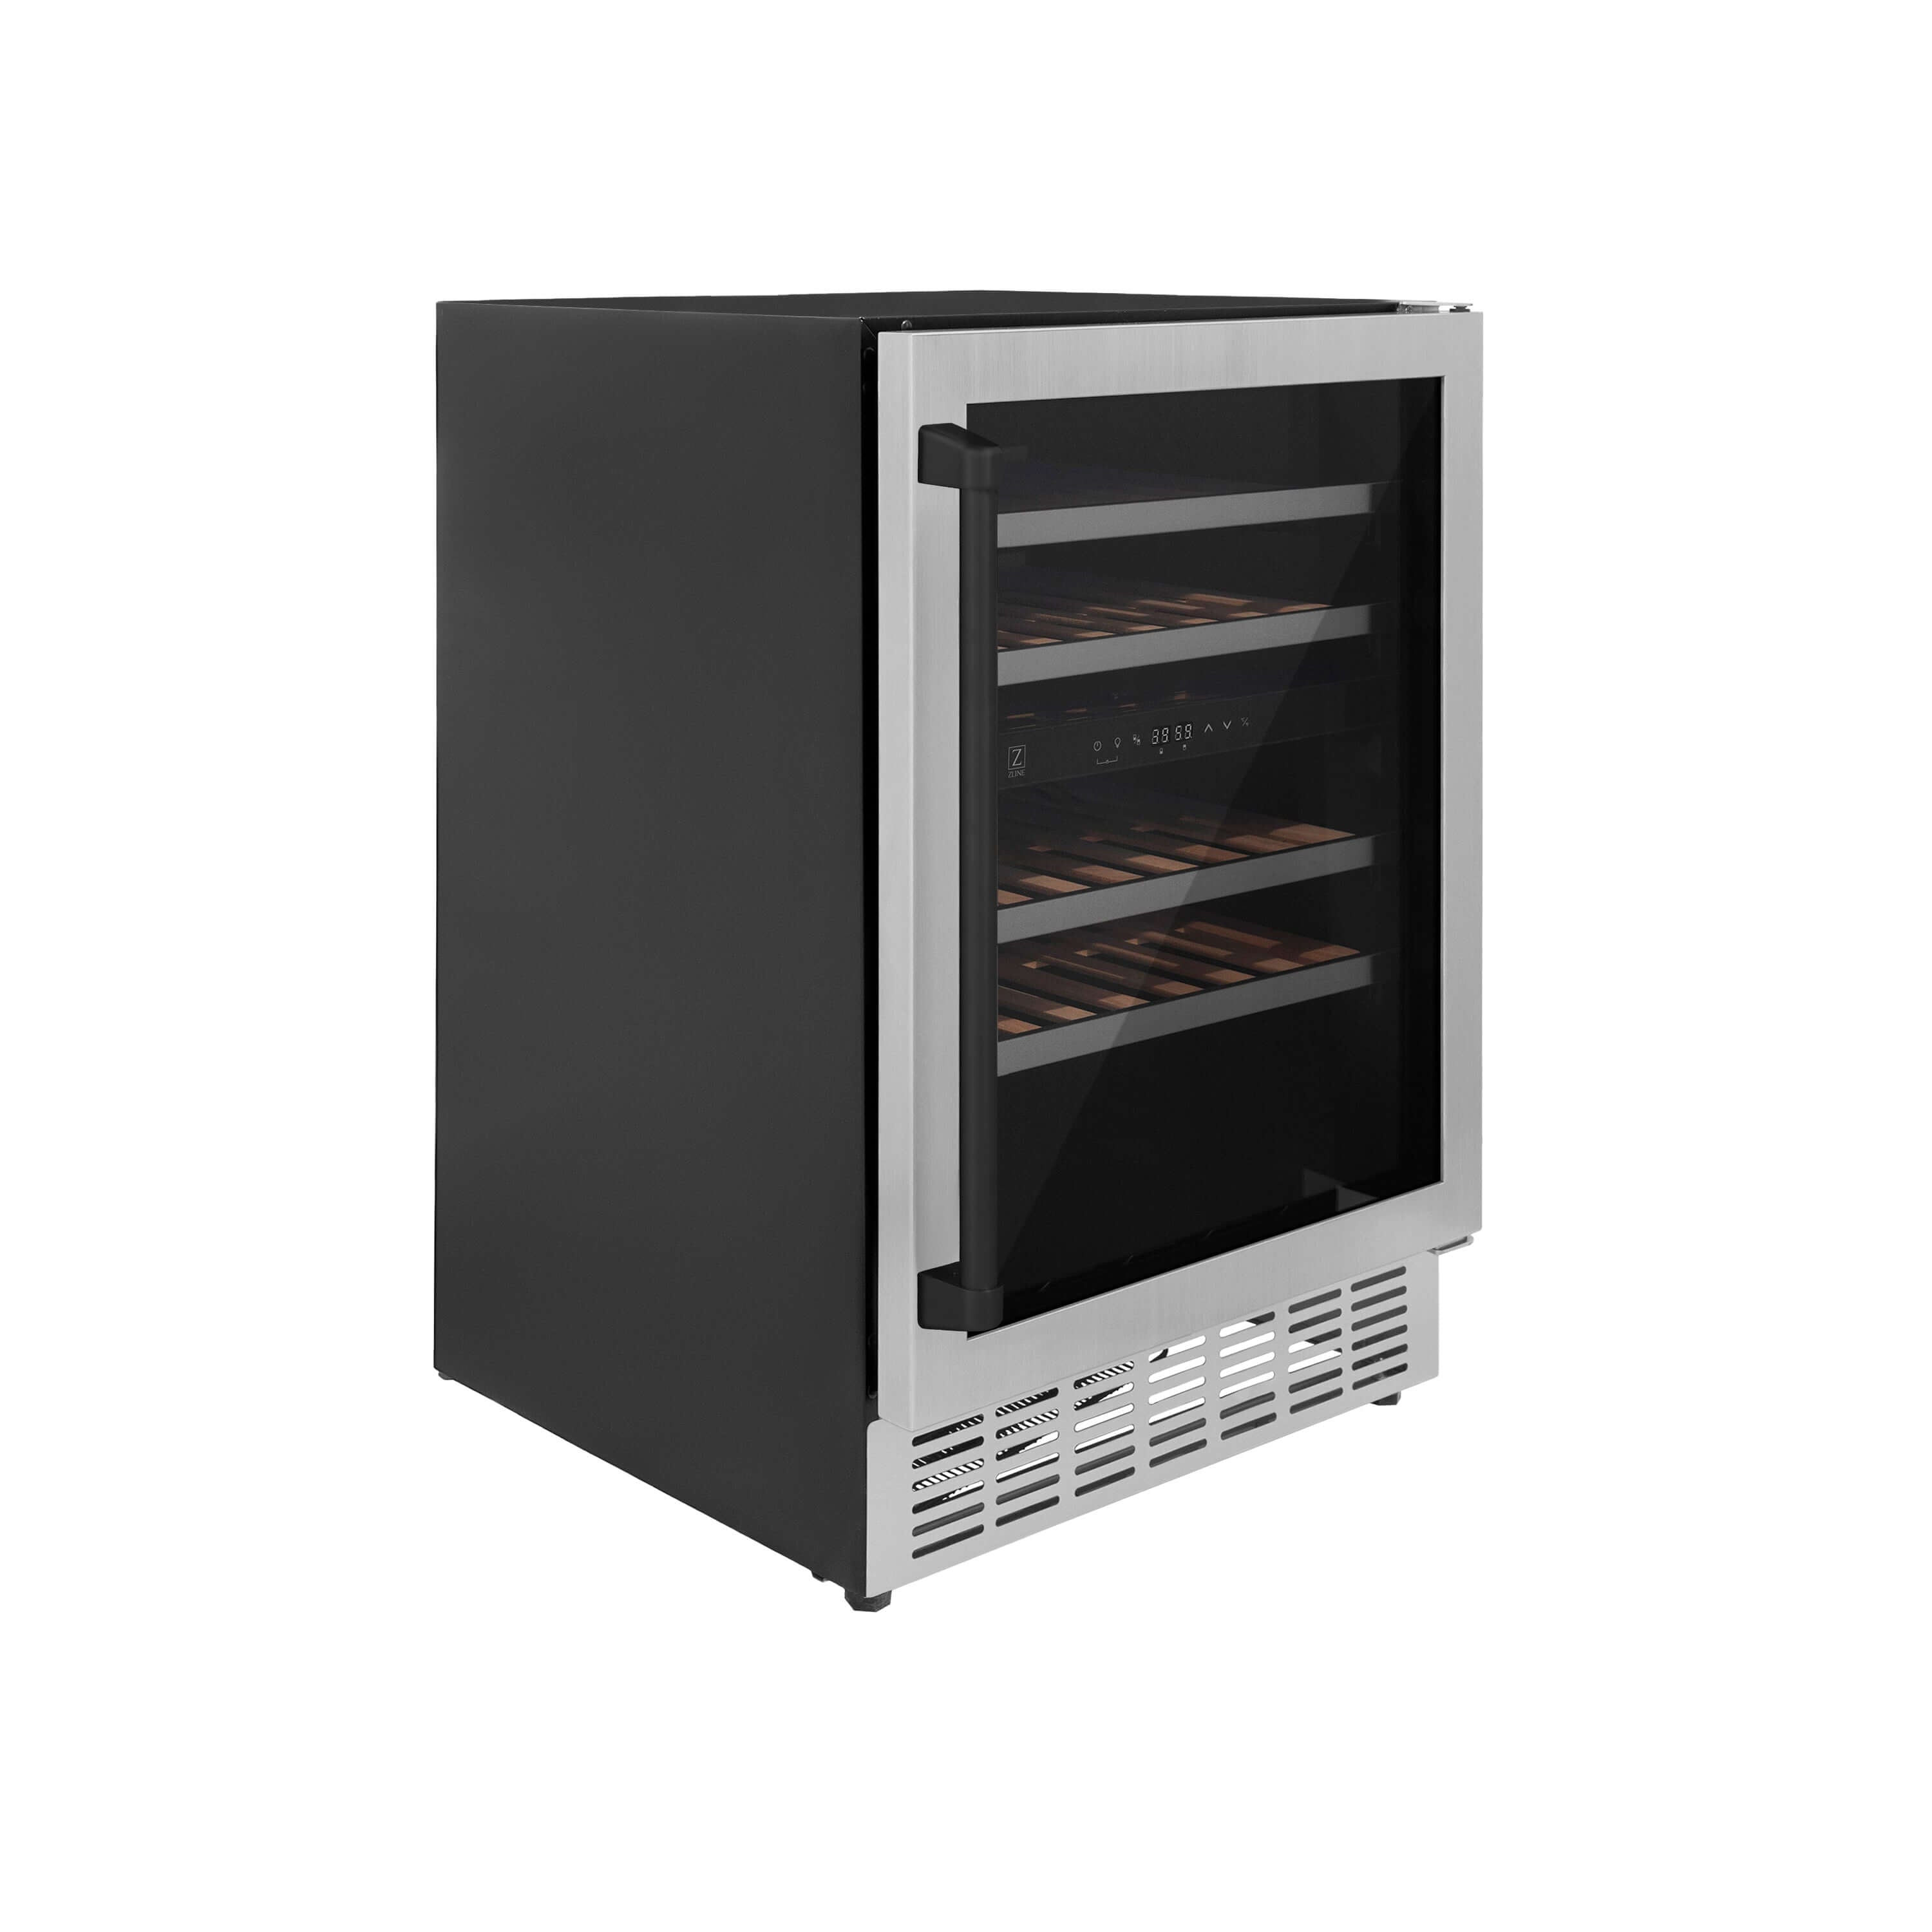 ZLINE Autograph Edition 24 in. Monument Dual Zone 44-Bottle Wine Cooler in Stainless Steel with Matte Black Accents (RWVZ-UD-24-MB) side, closed.